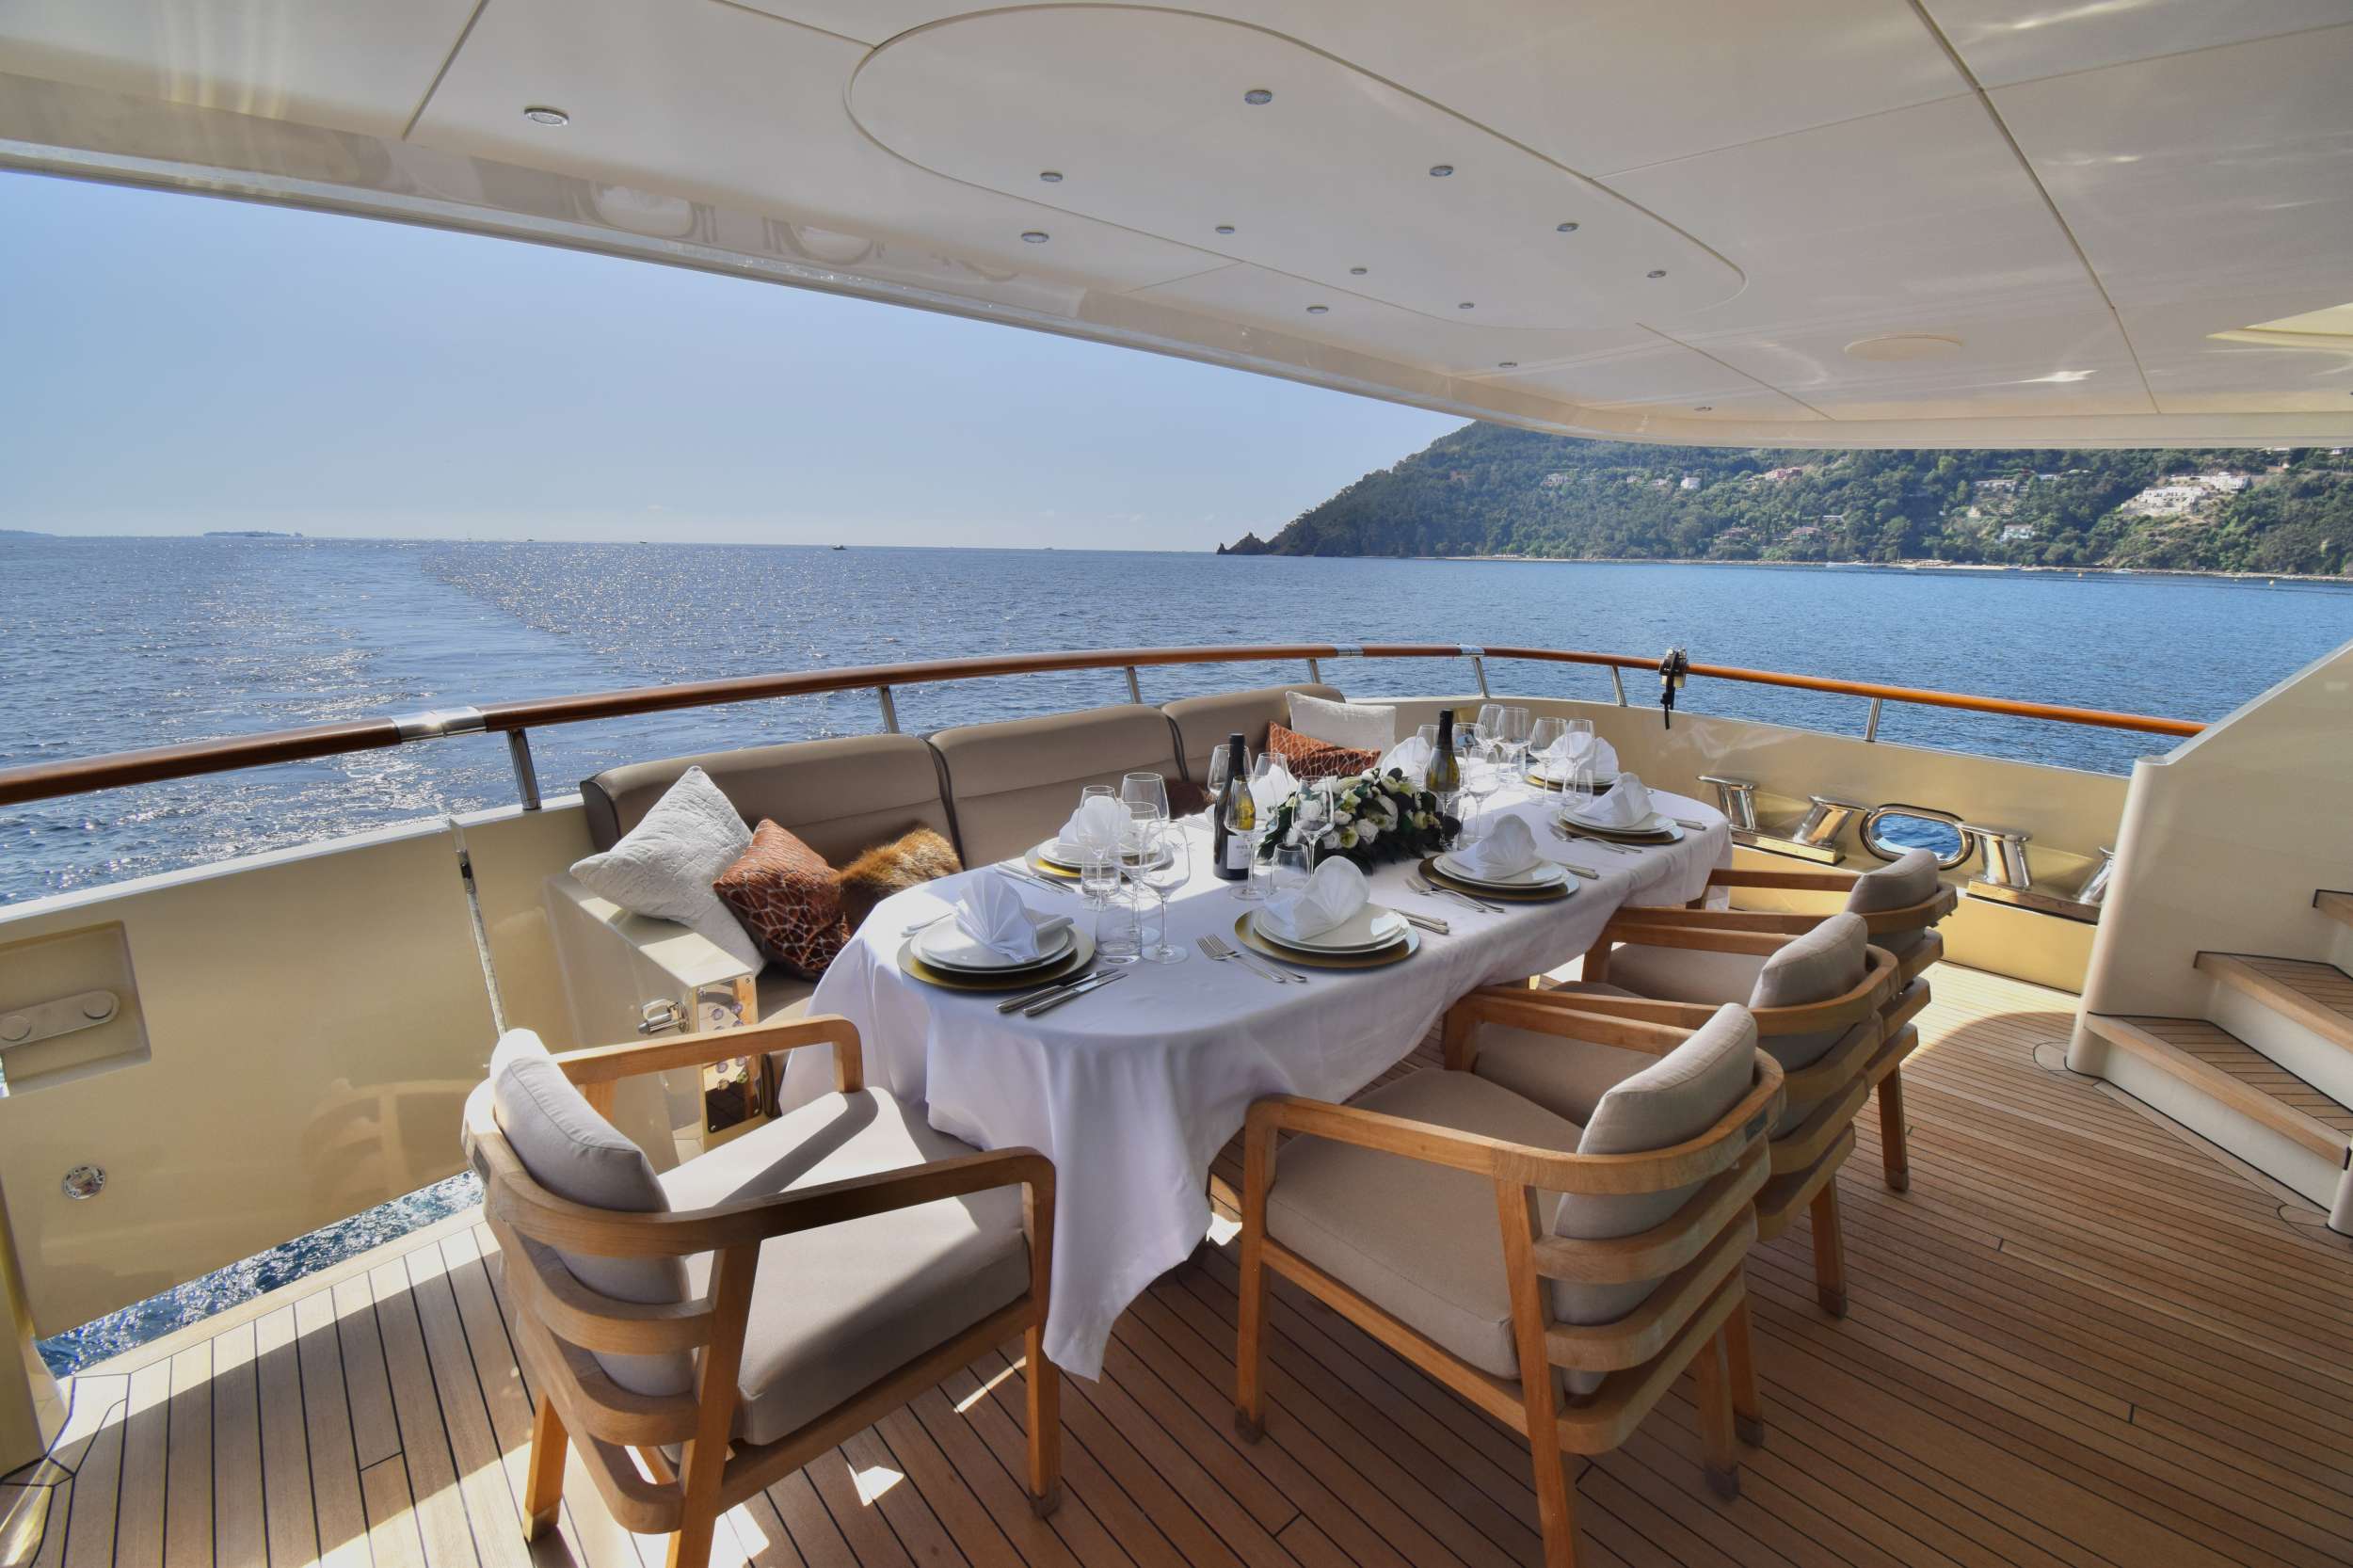 ORIZZONTE - Superyacht charter Balearics & Boat hire in W. Med -Naples/Sicily, W. Med -Riviera/Cors/Sard., W. Med - Spain/Balearics 3